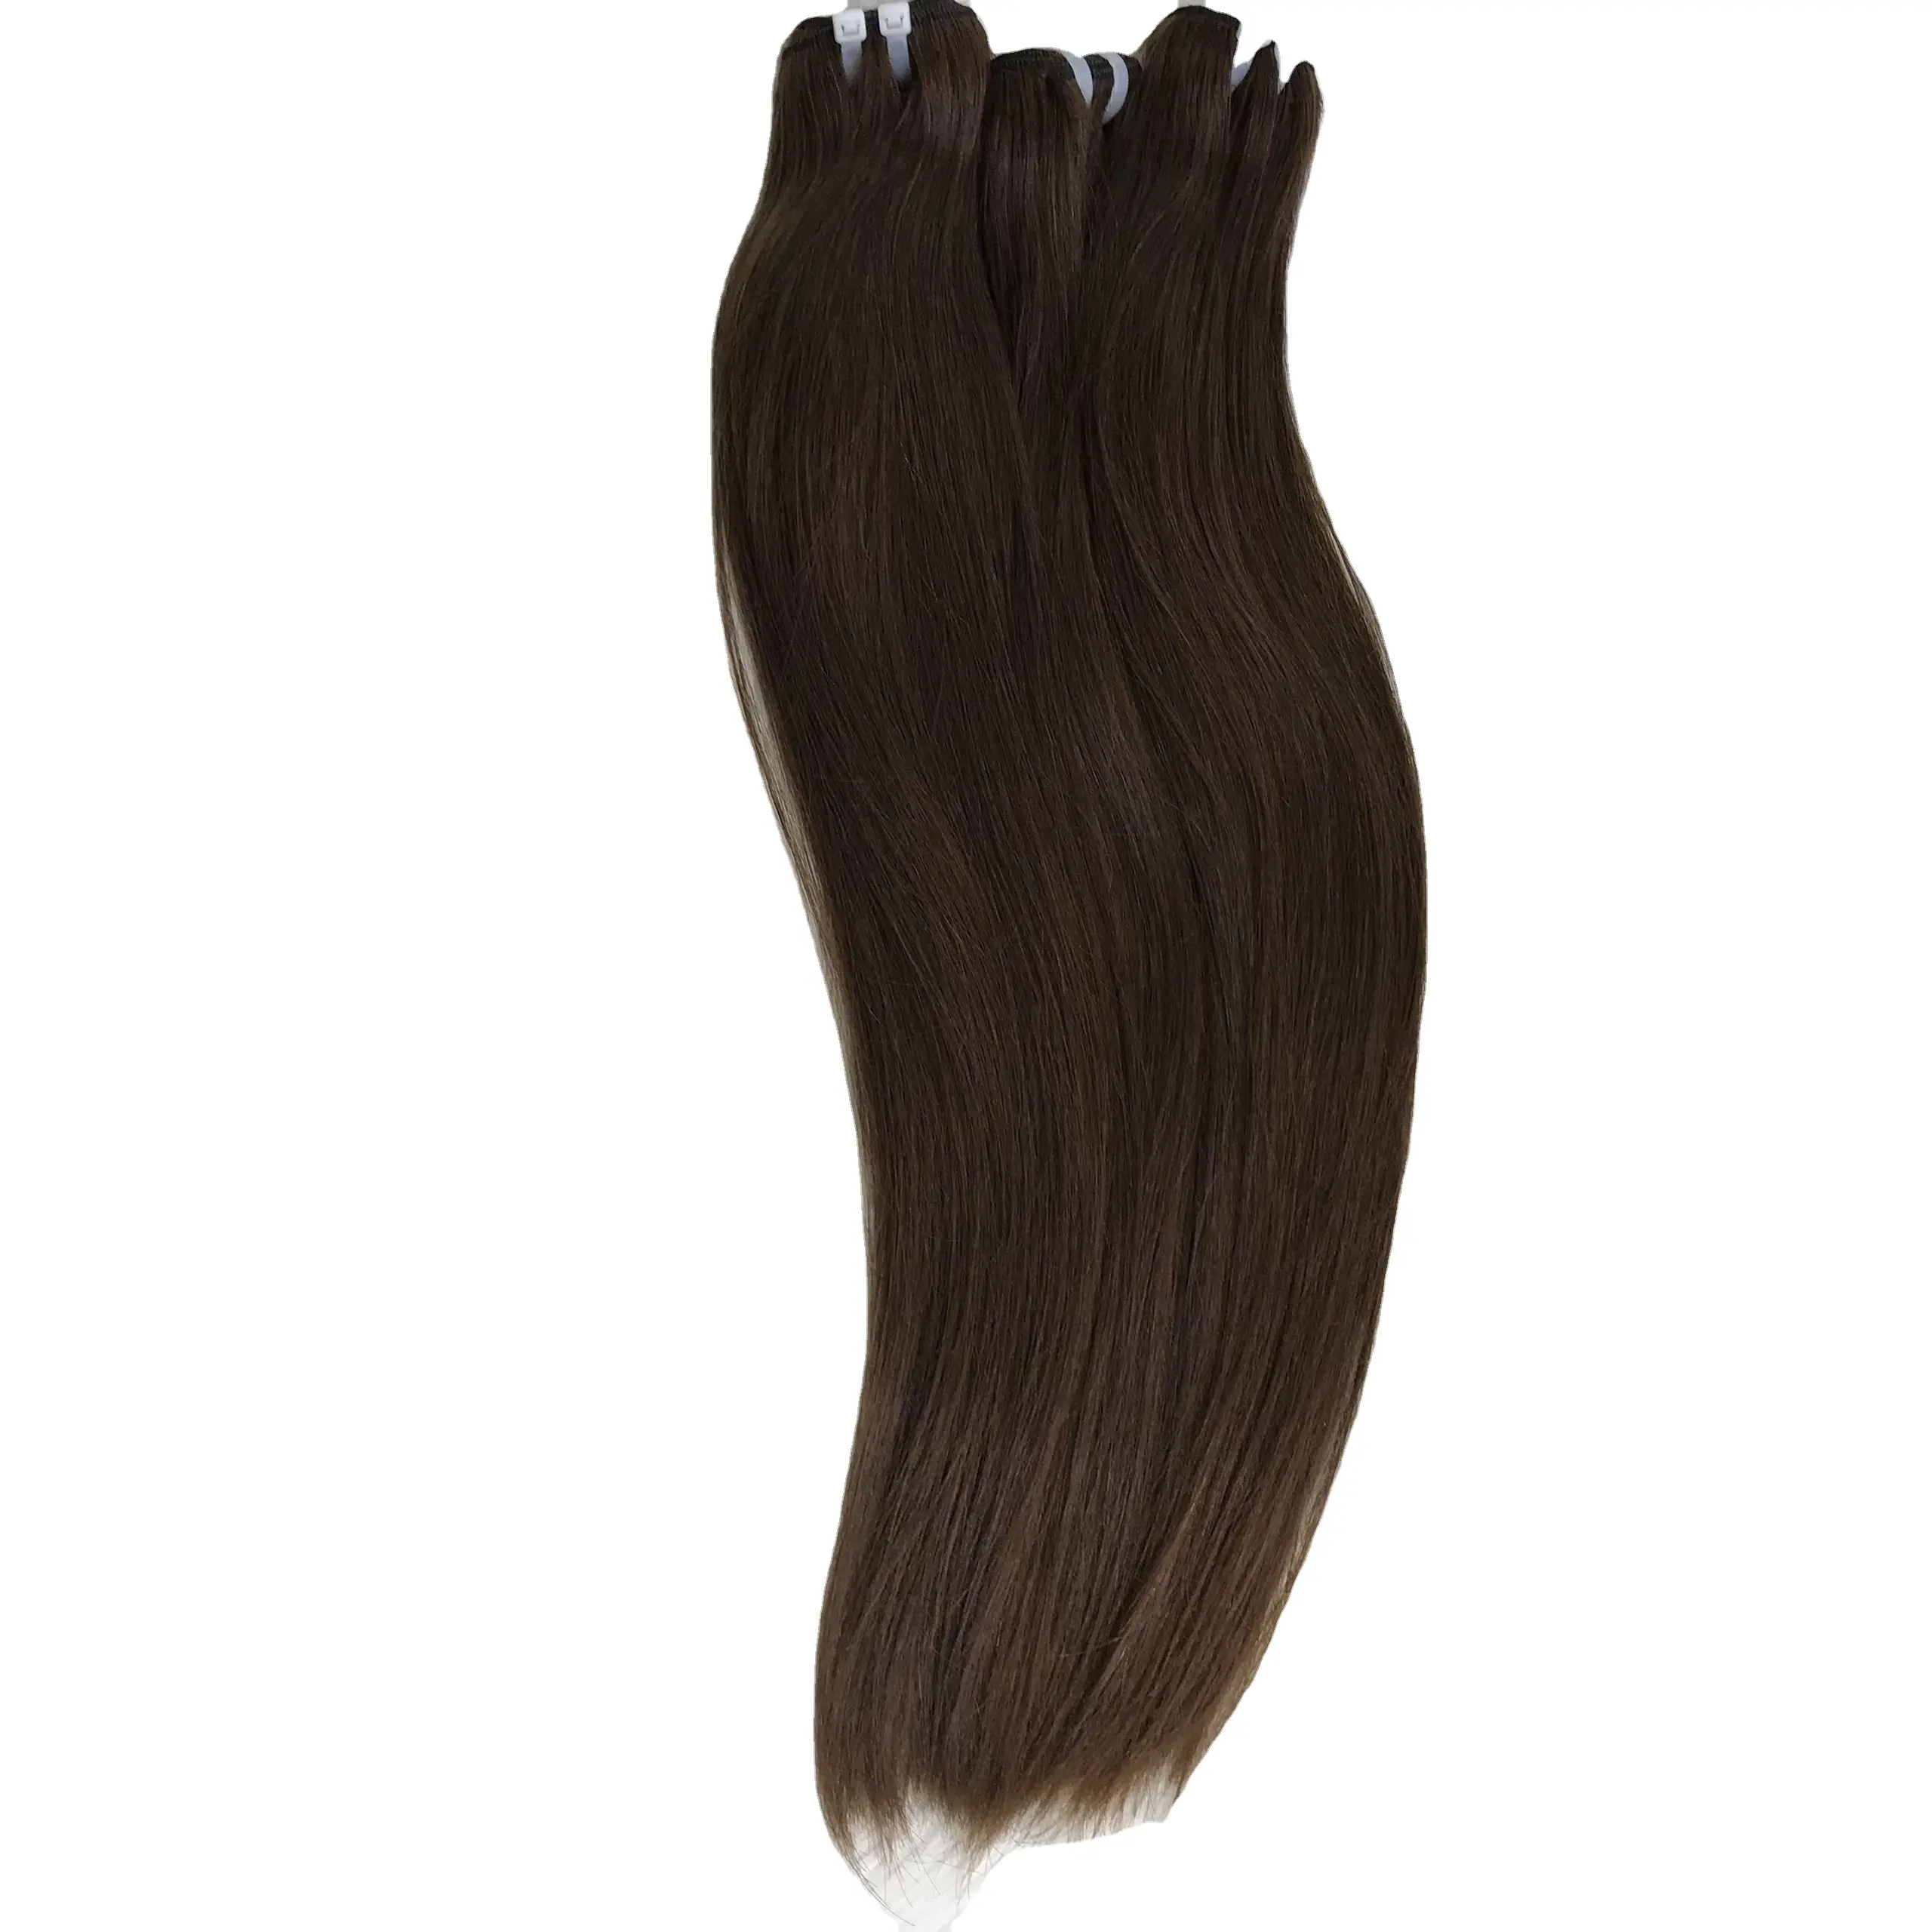 Hottest Natural Straight Hd Full Lace Wig Cambodian Hair 100% Raw Vietnamese Hair Wholesale Price Shipping UPS DHL FEDEX